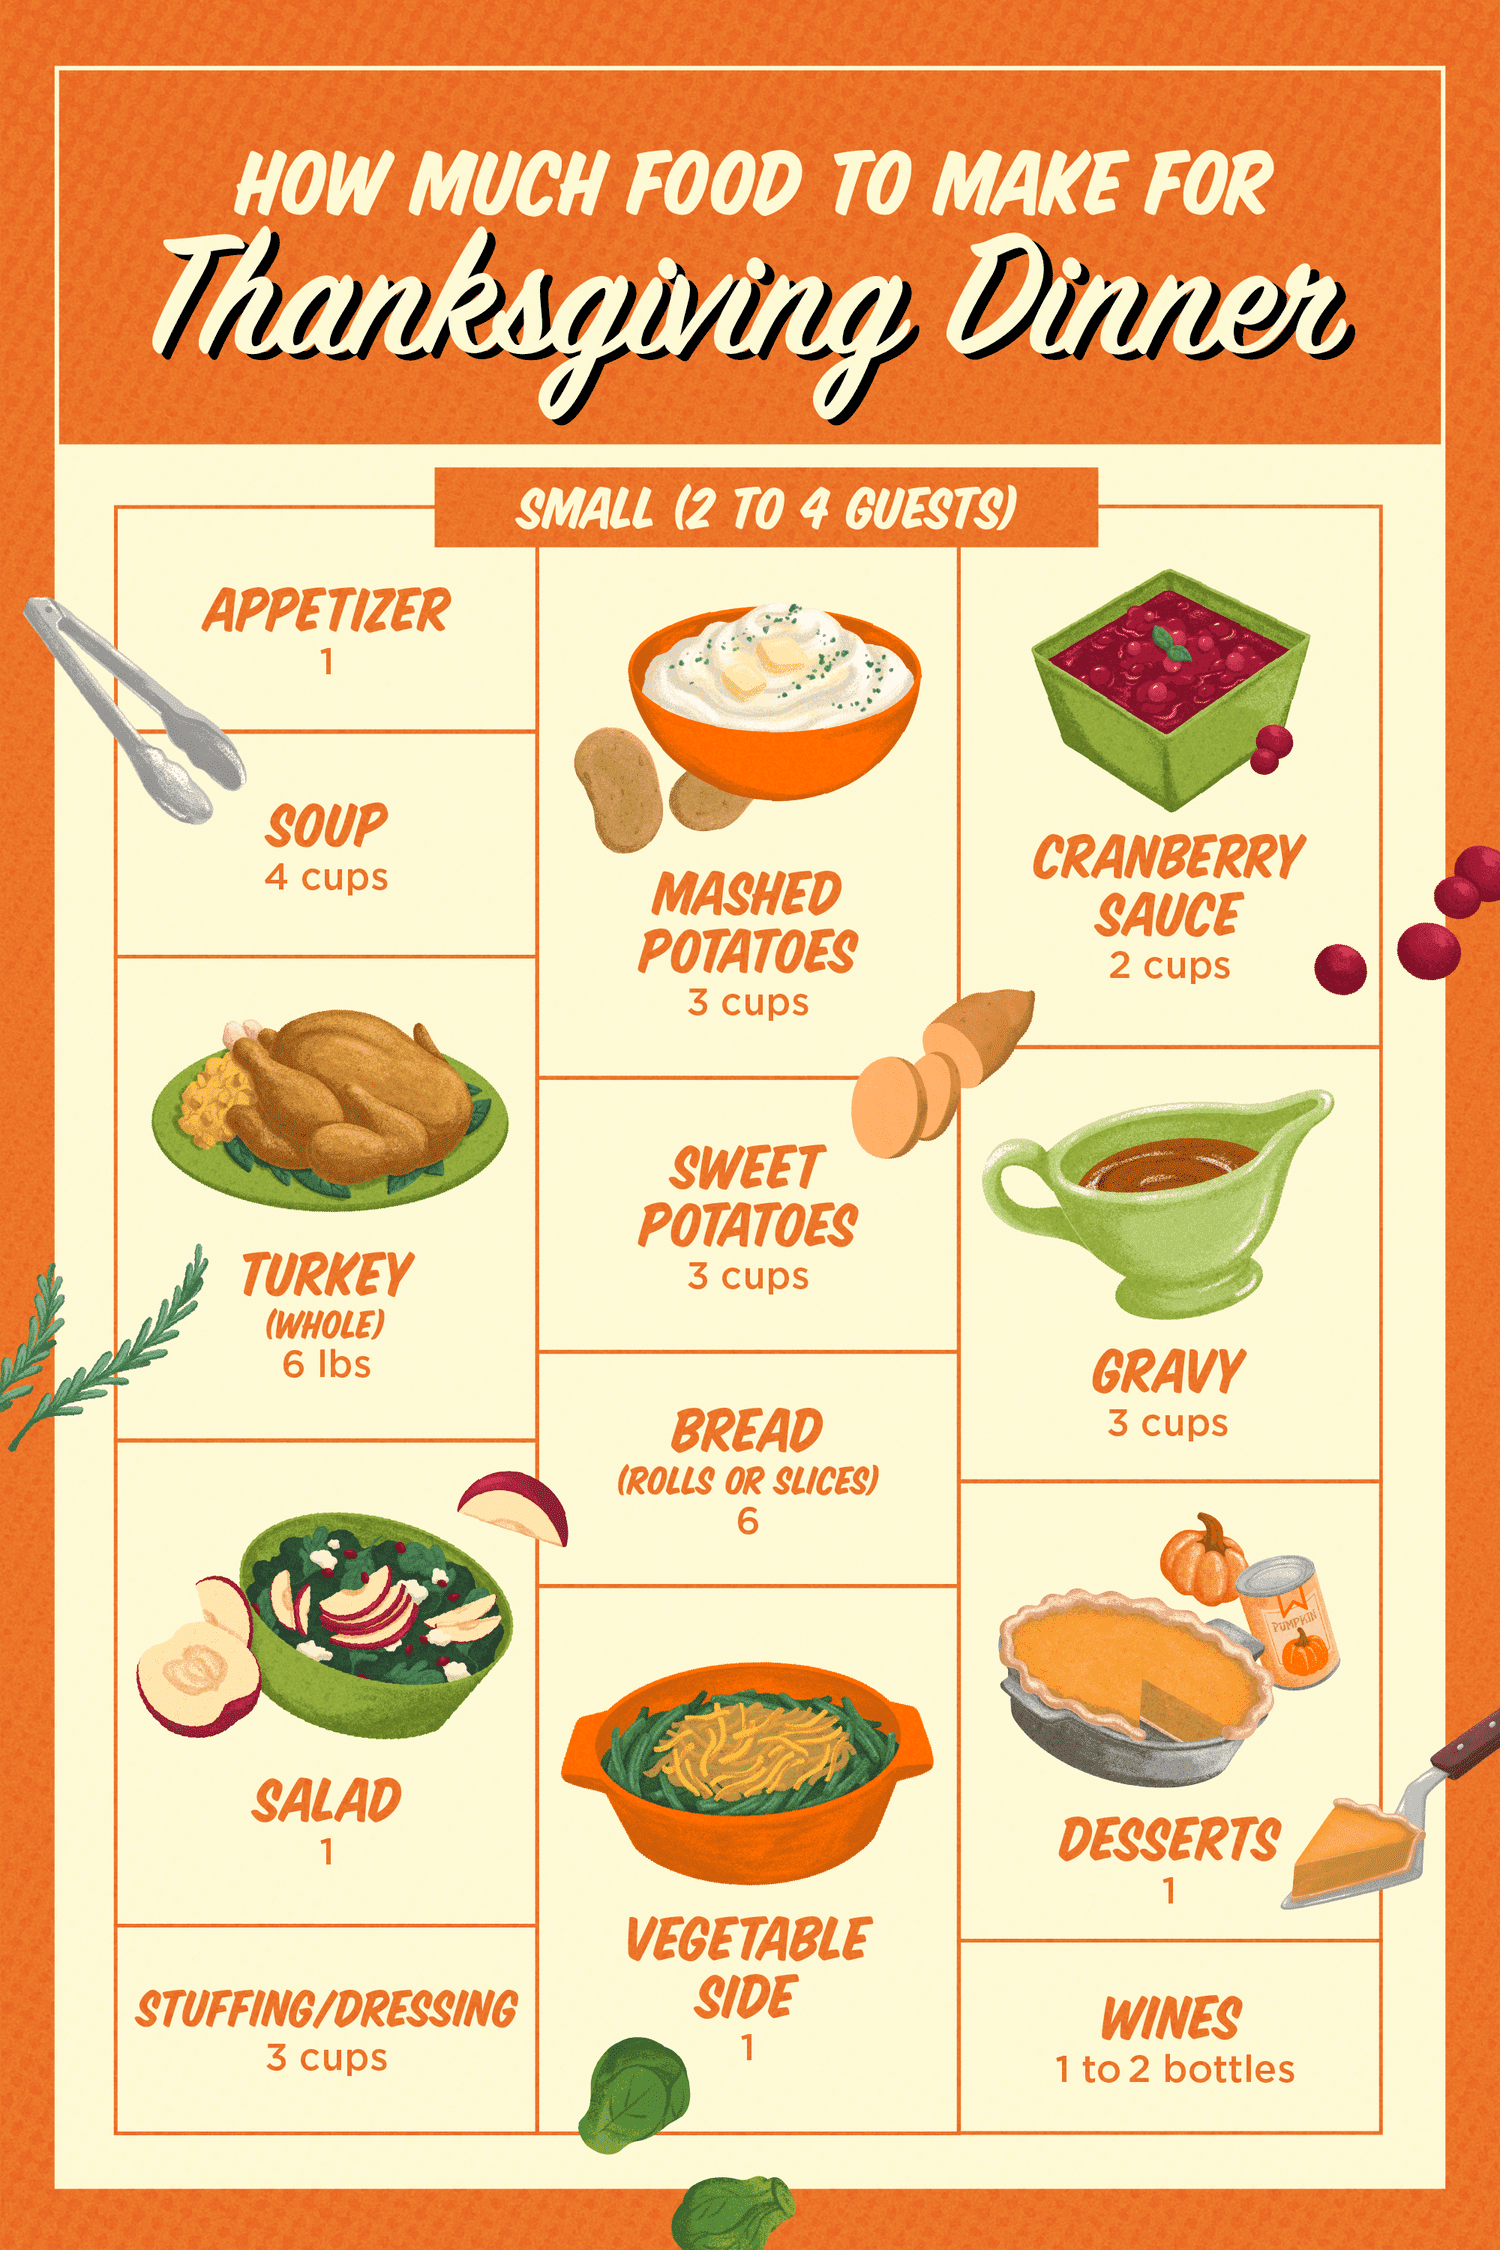 illustration of how much food to make for a small-size group for Thanksgiving, including turkey, stuffing, gravy, sides, appetizers, and dessert